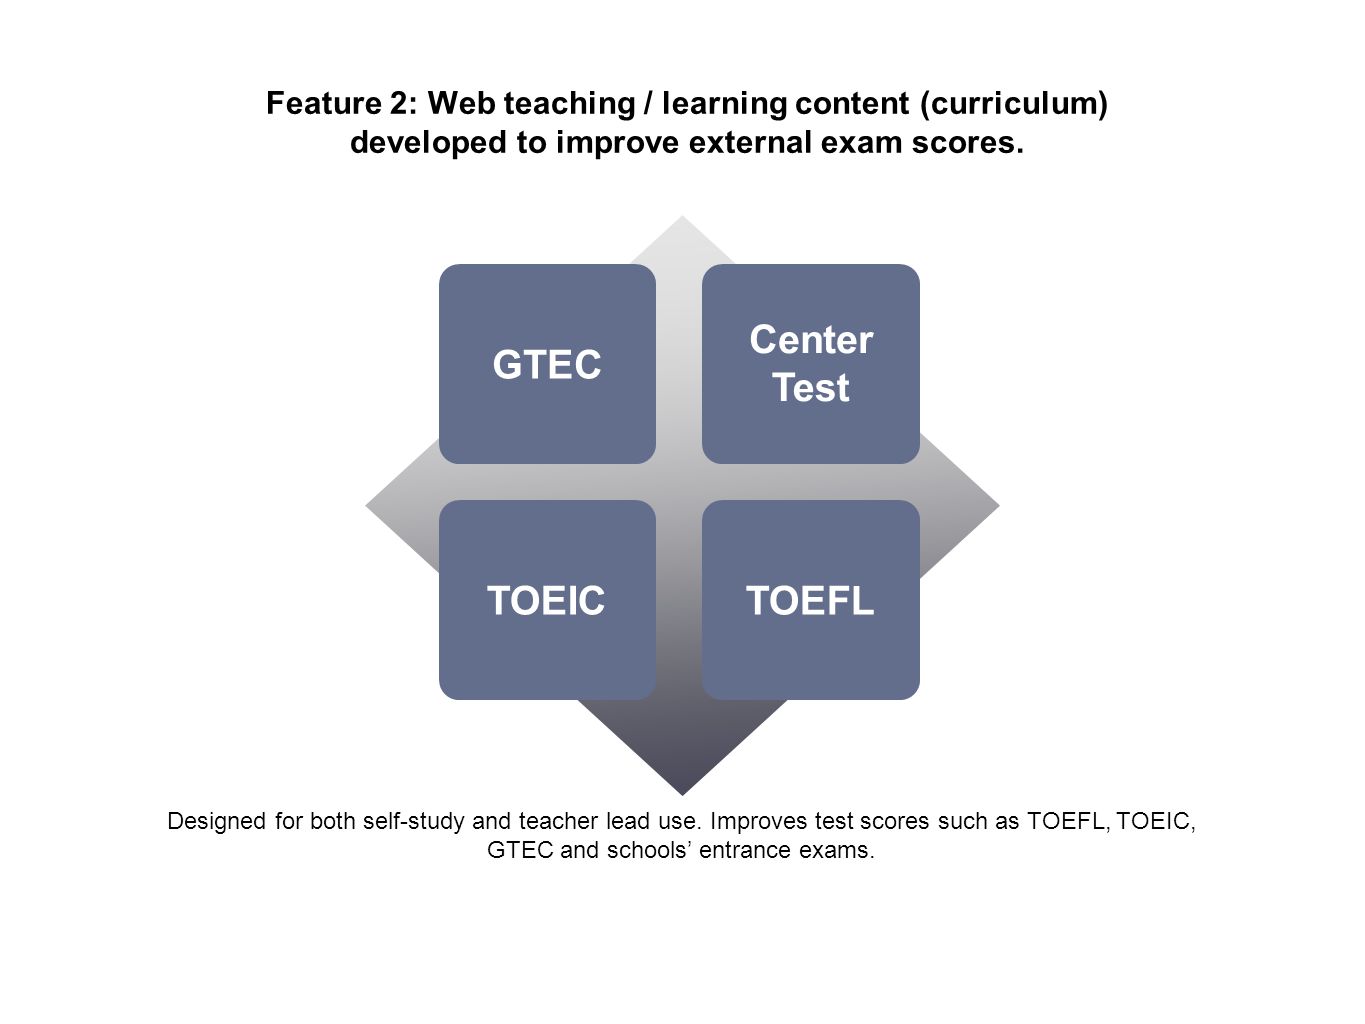 Feature 2: Web teaching / learning content (curriculum) developed to improve external exam scores.